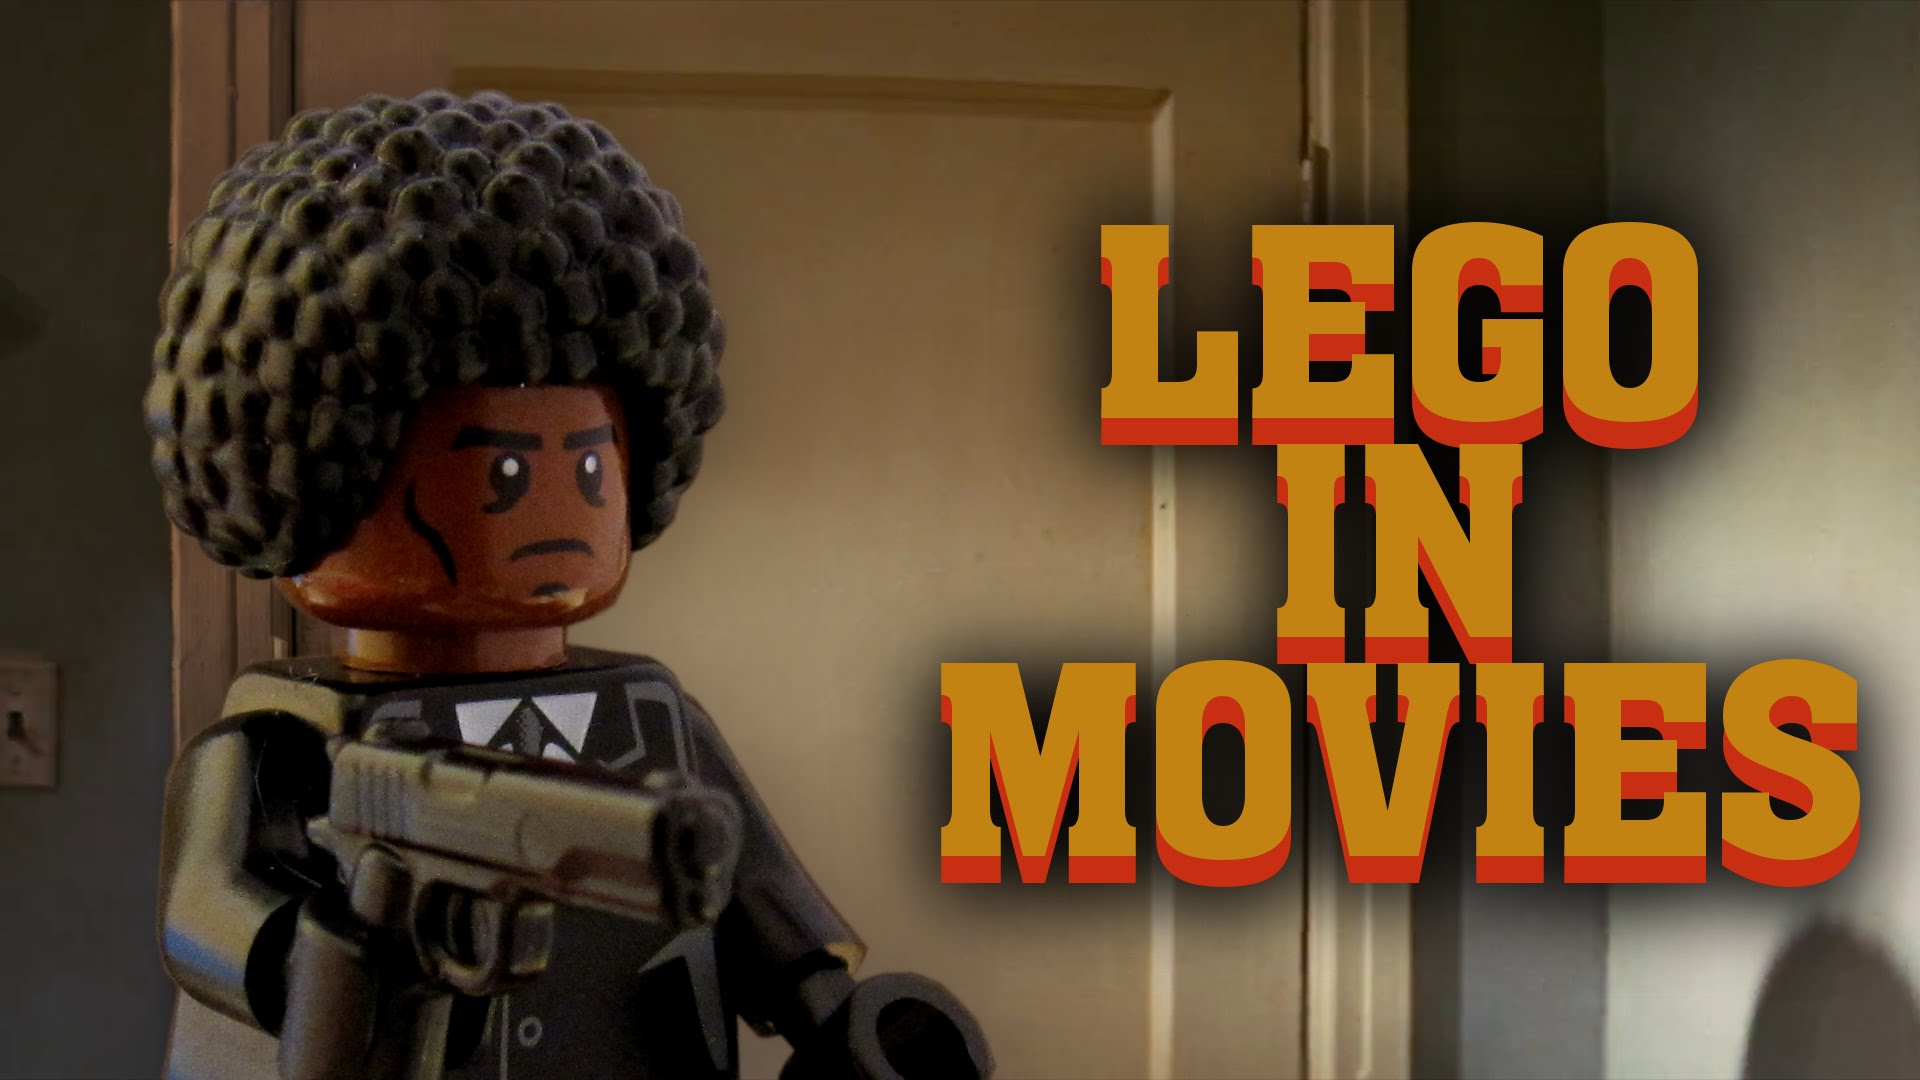 Famous Movie Scenes Recreated in Lego - Gallery